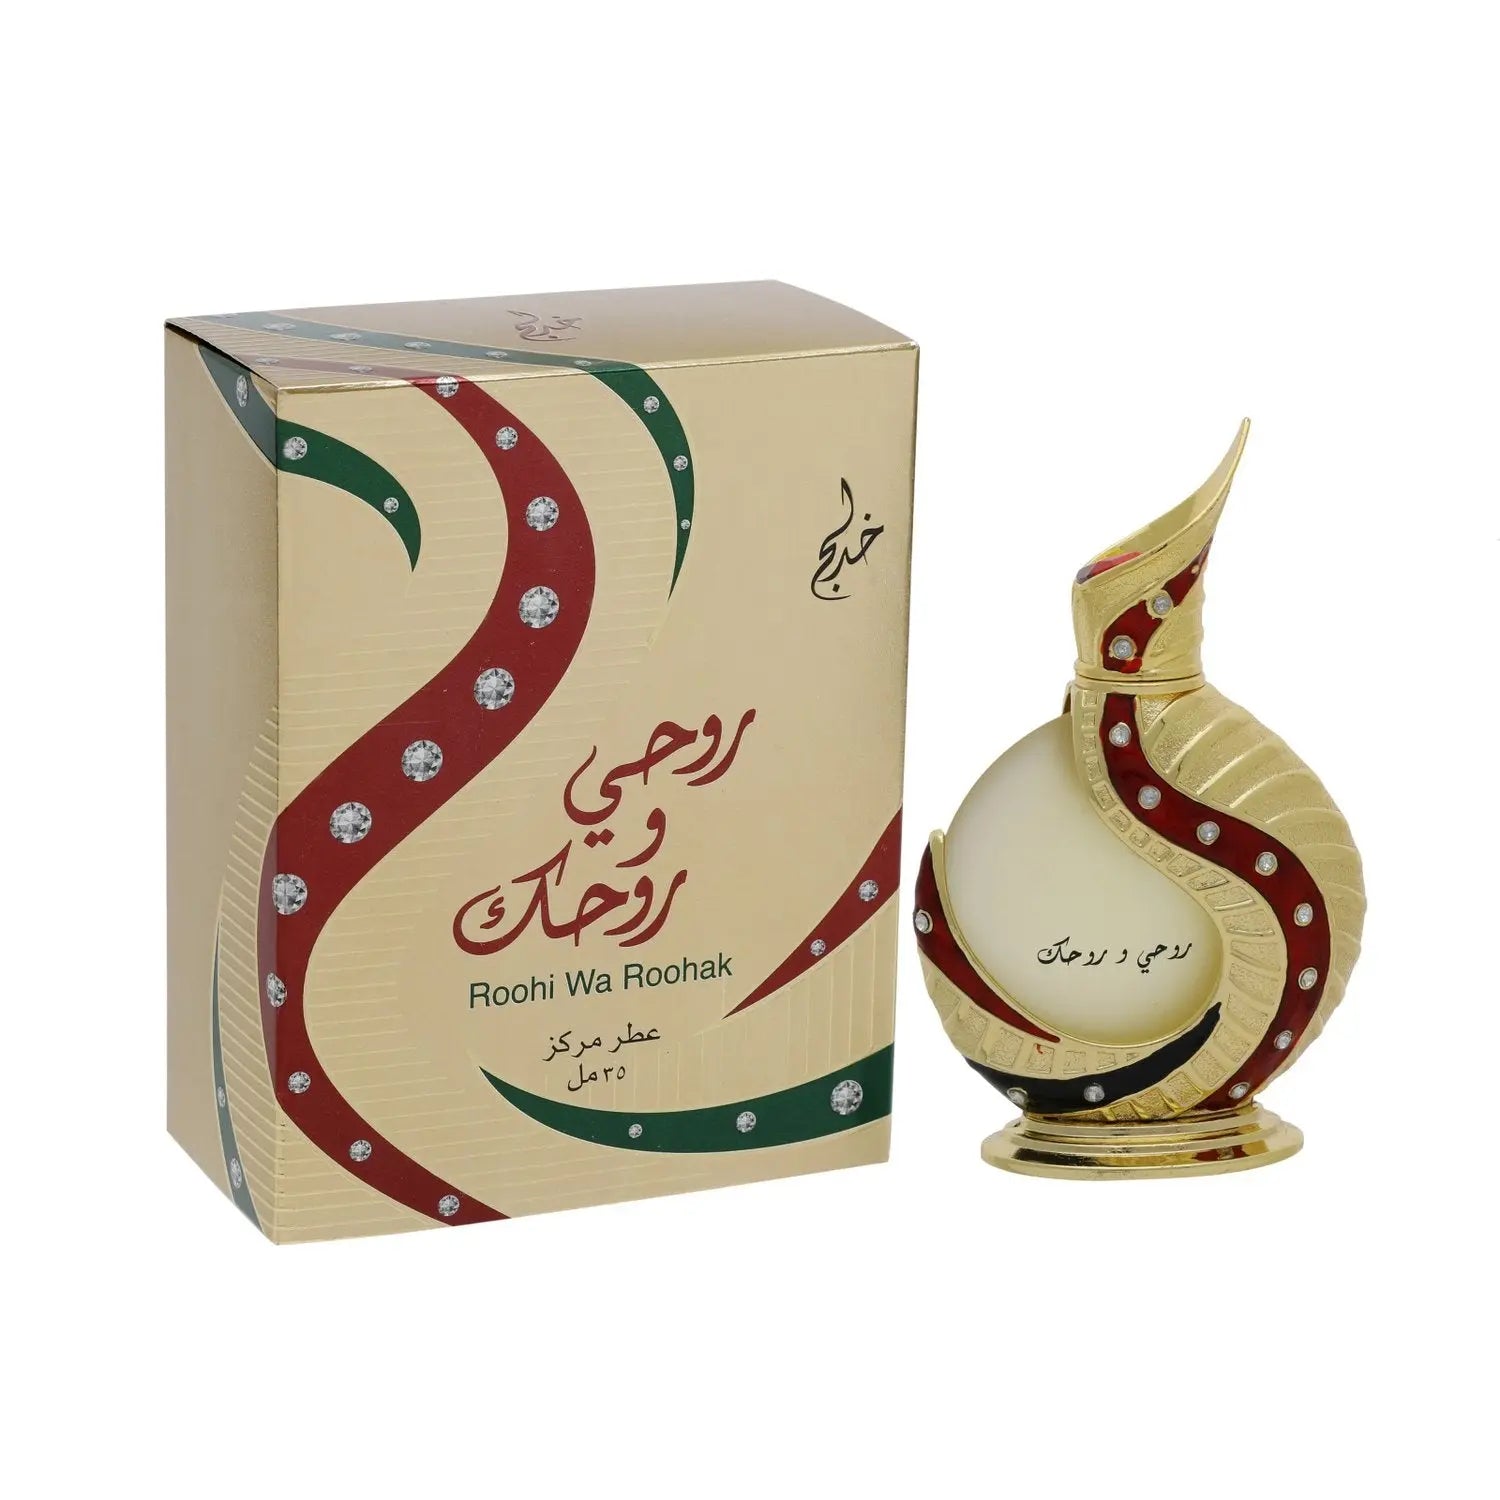 The image presents a perfume bottle with its packaging:  The bottle has a unique, spherical base with an elongated, curved neck and pointed tip, finished in a gold tone with maroon and green decorative accents, and gem-like stones. Arabic calligraphy is present on the body of the bottle, and it stands on a small gold stand. The packaging box mirrors the bottle's design, with a gold background and wave-like decorative elements in maroon and green that swirl around the box.